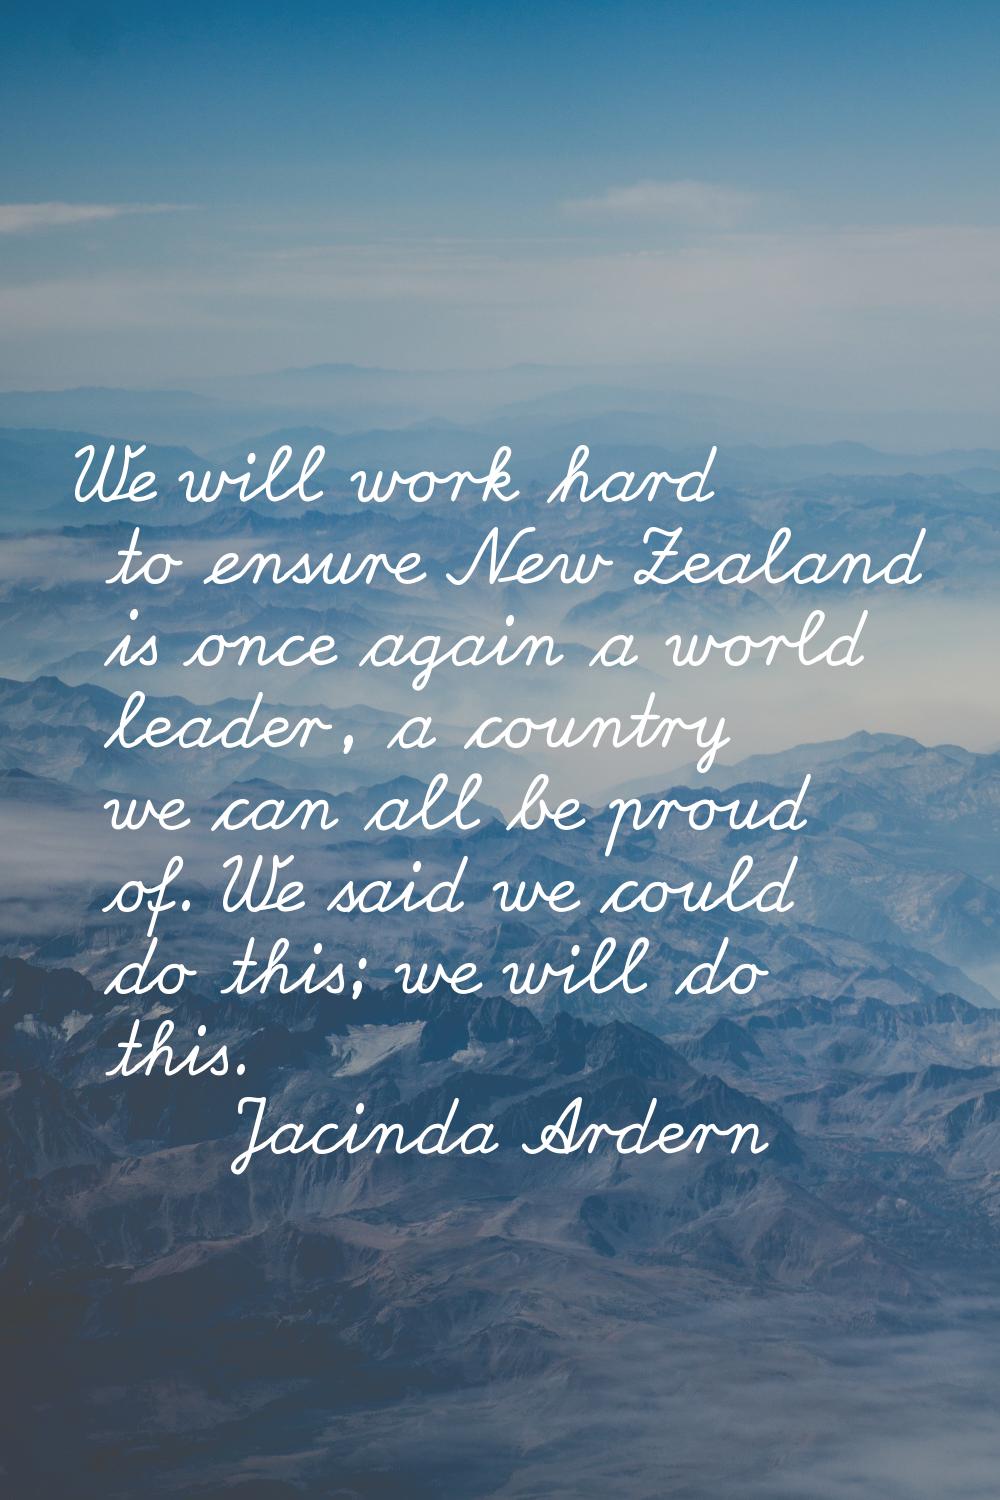 We will work hard to ensure New Zealand is once again a world leader, a country we can all be proud